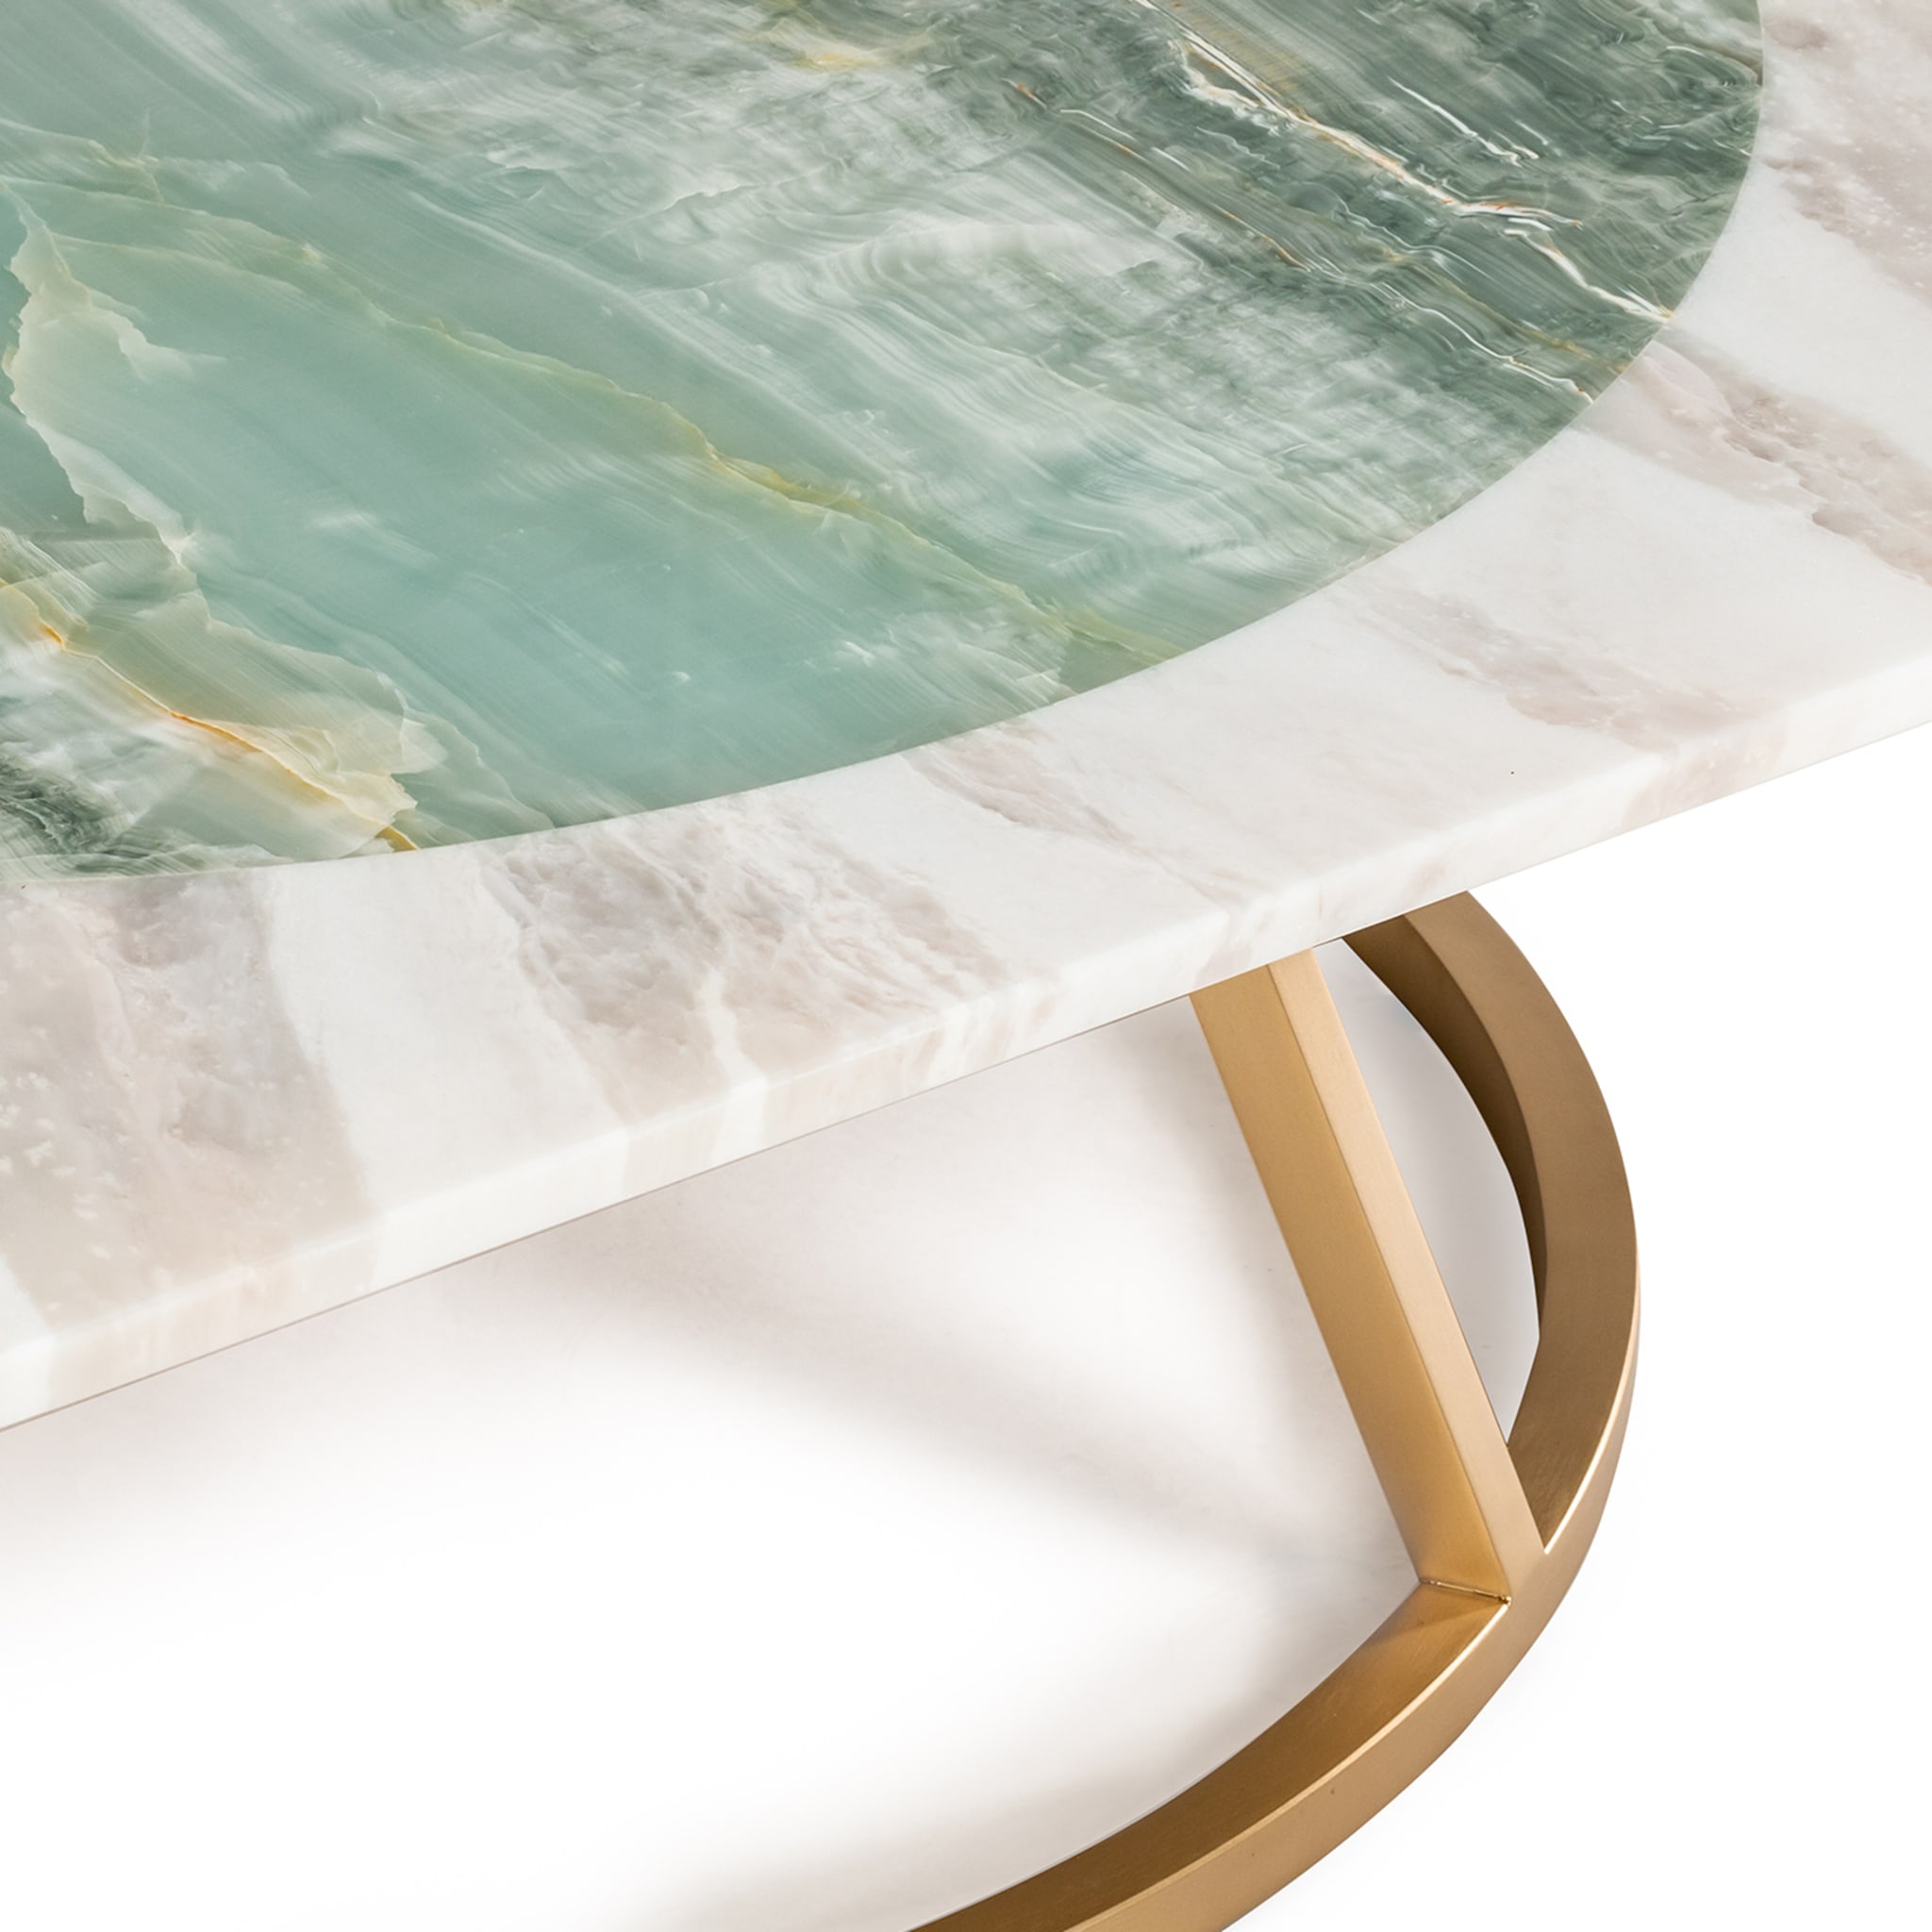 Pantheon Square Polychrome Coffee Table by Maarten De Ceulaer - Alternative view 3